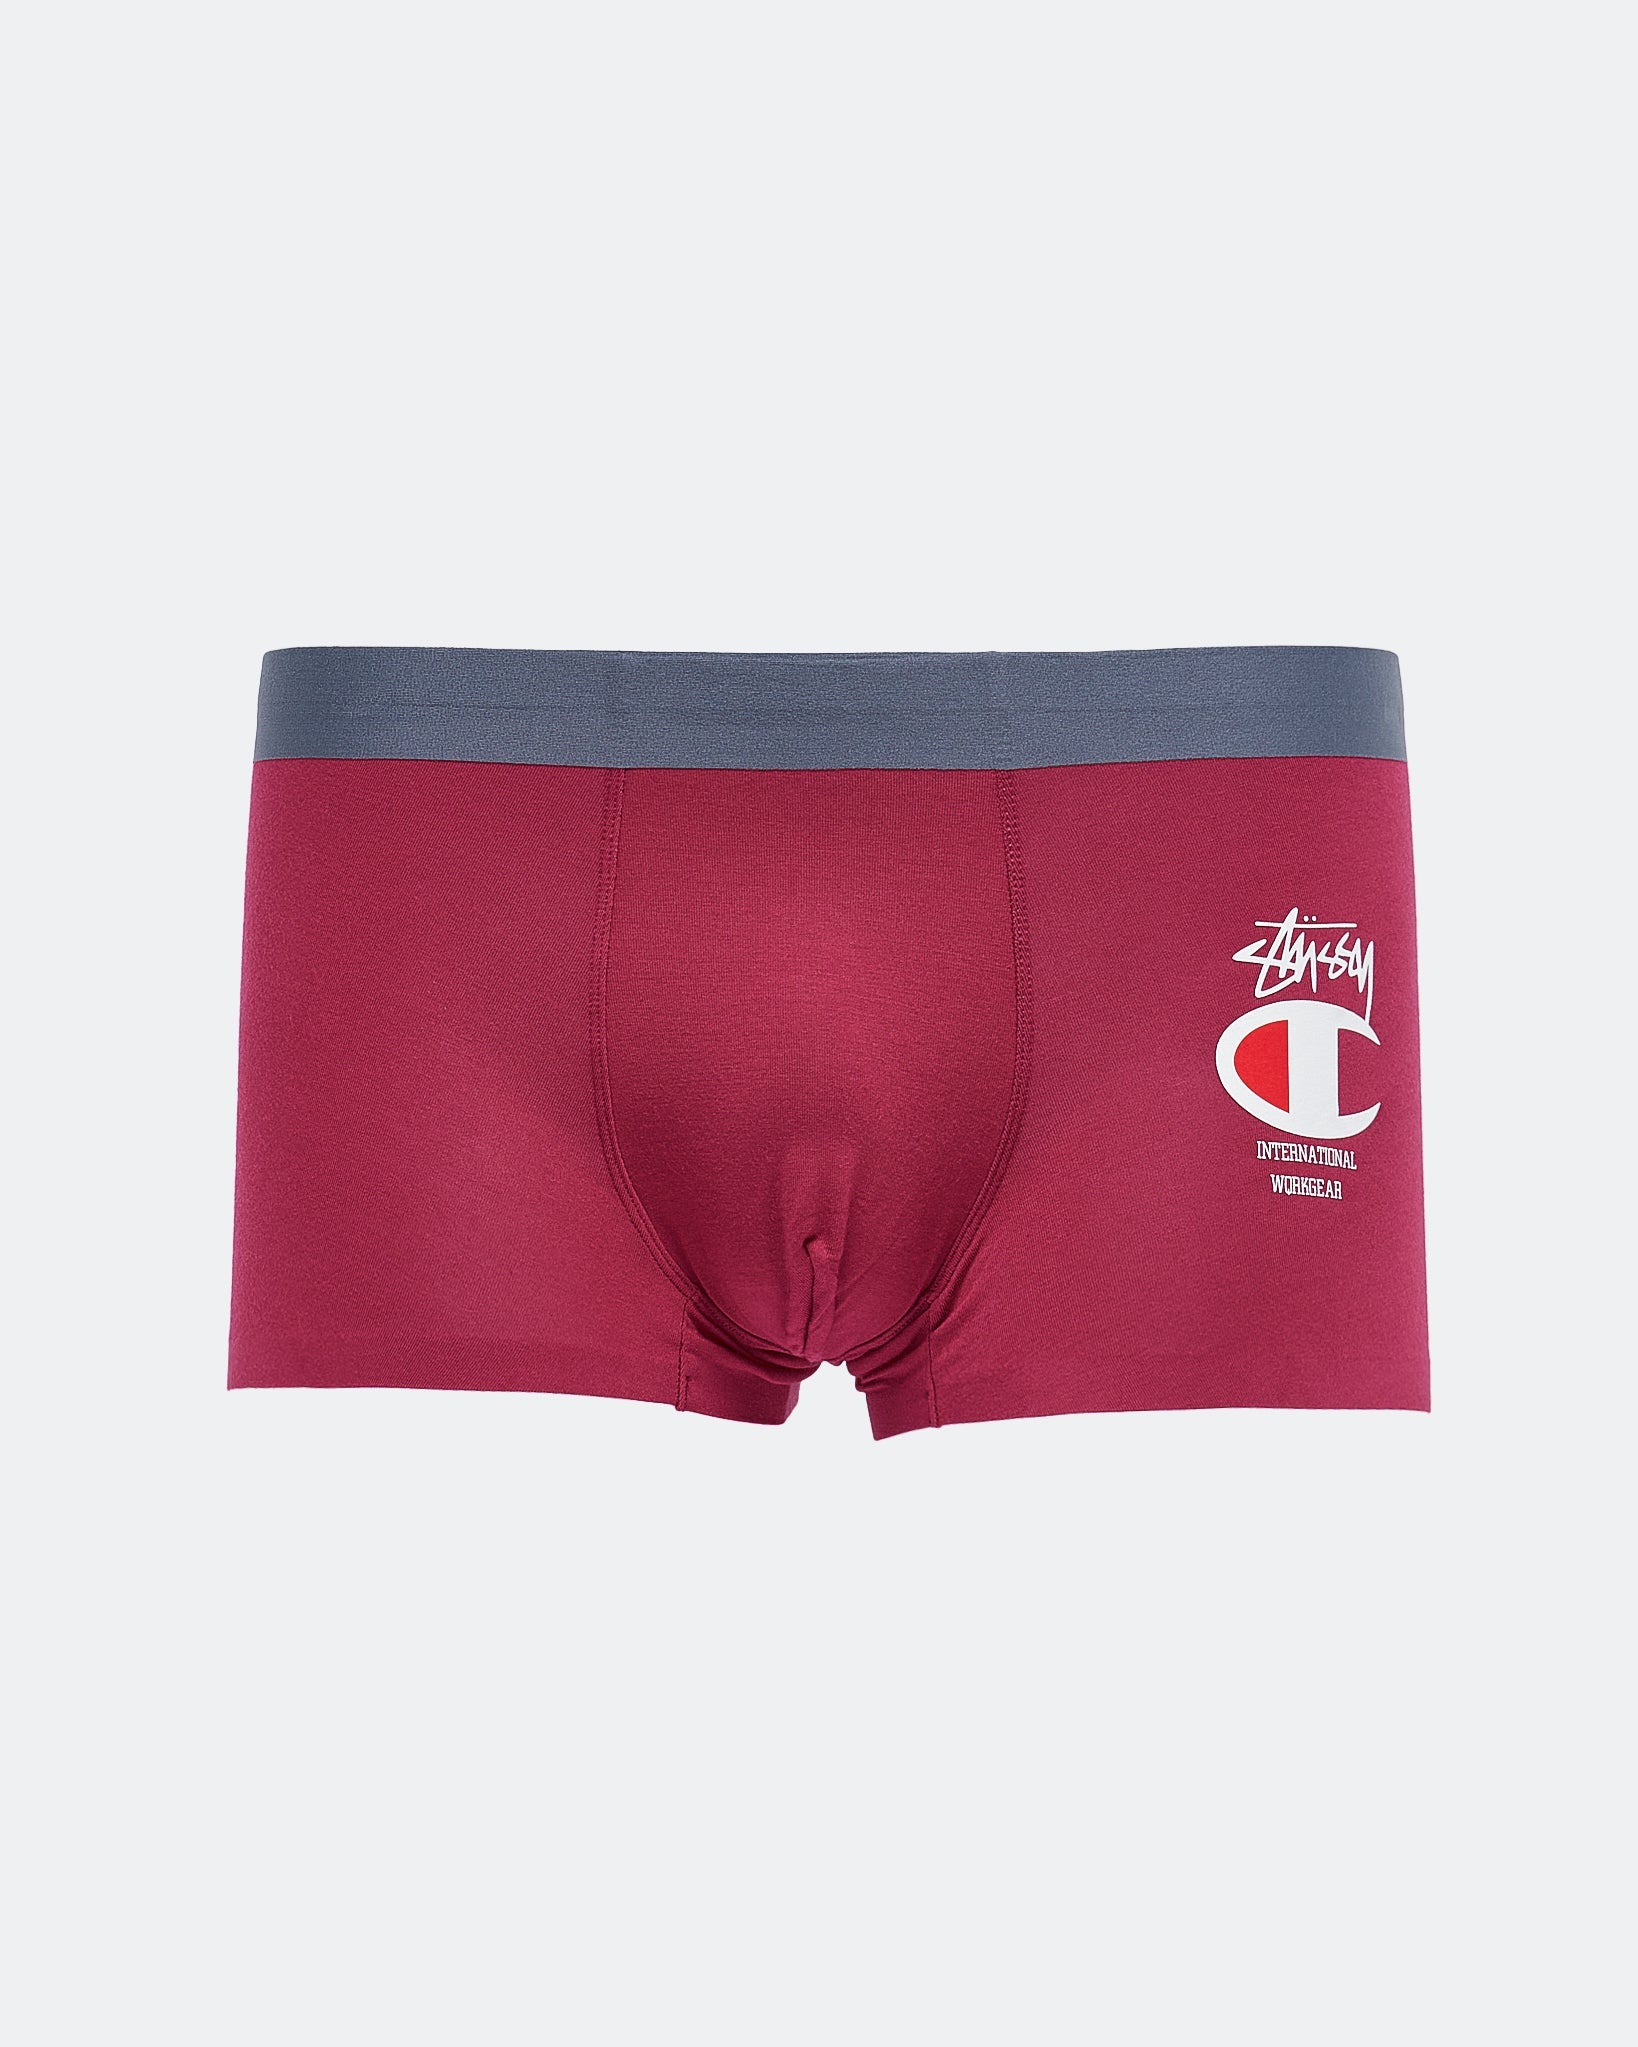 MOI OUTFIT-Champion Printed Men Underwear 5.90